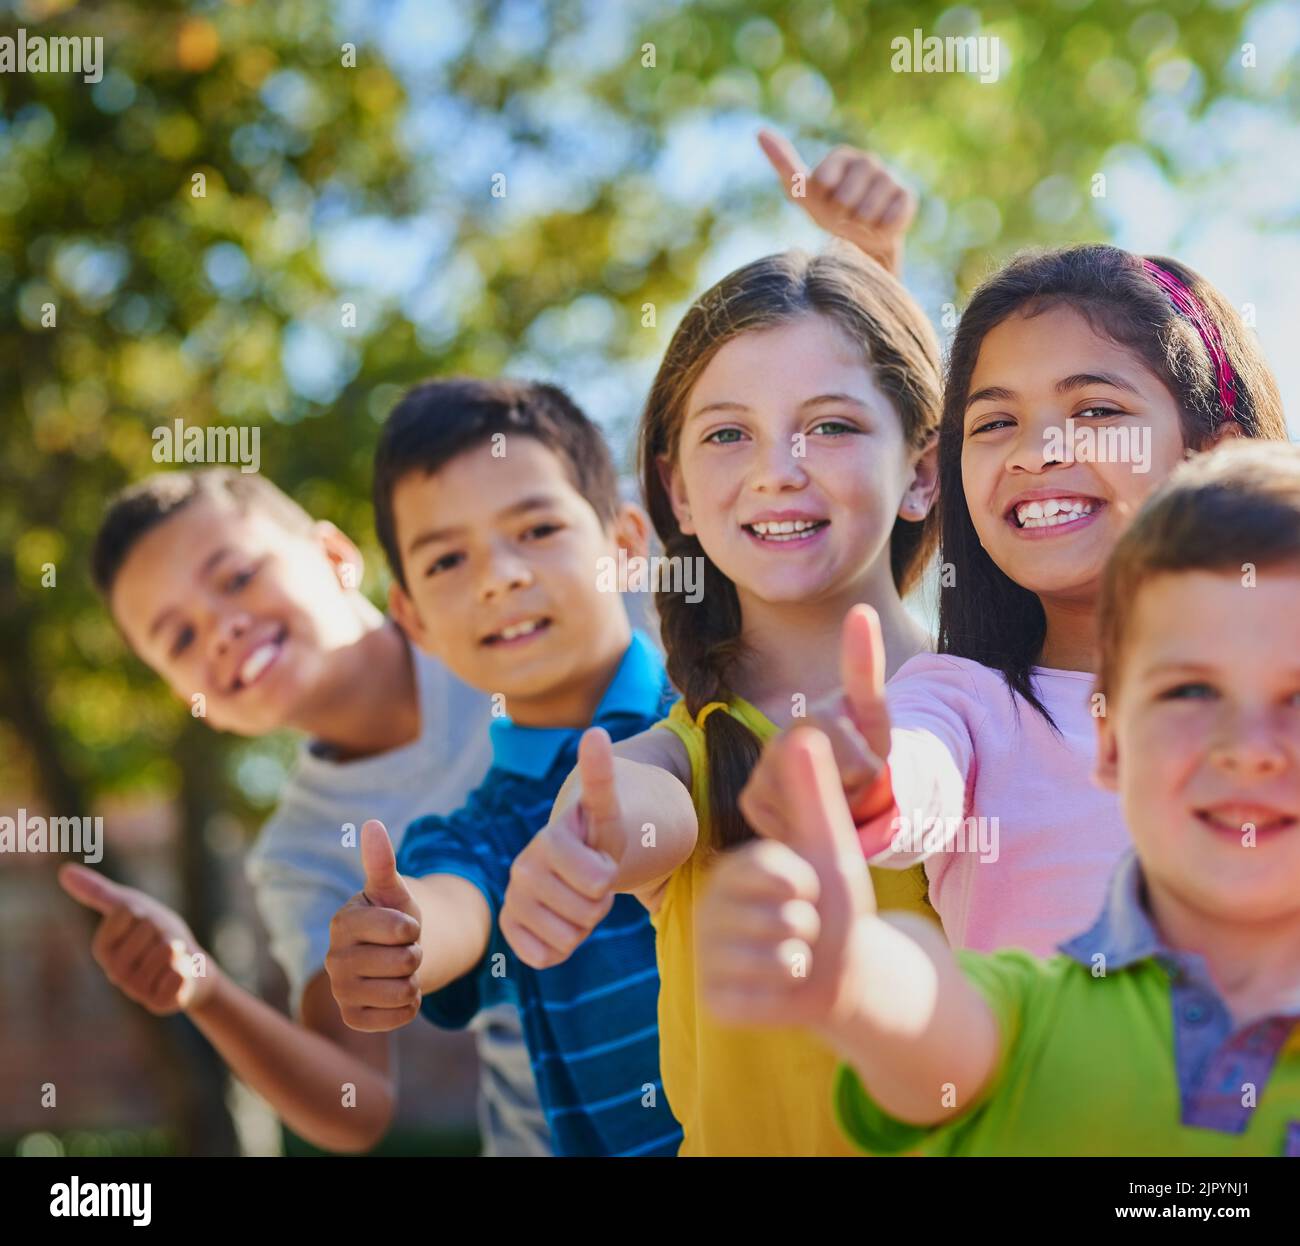 Thumbs up to being a kid. a diverse group of children showing thumbs up outside. Stock Photo